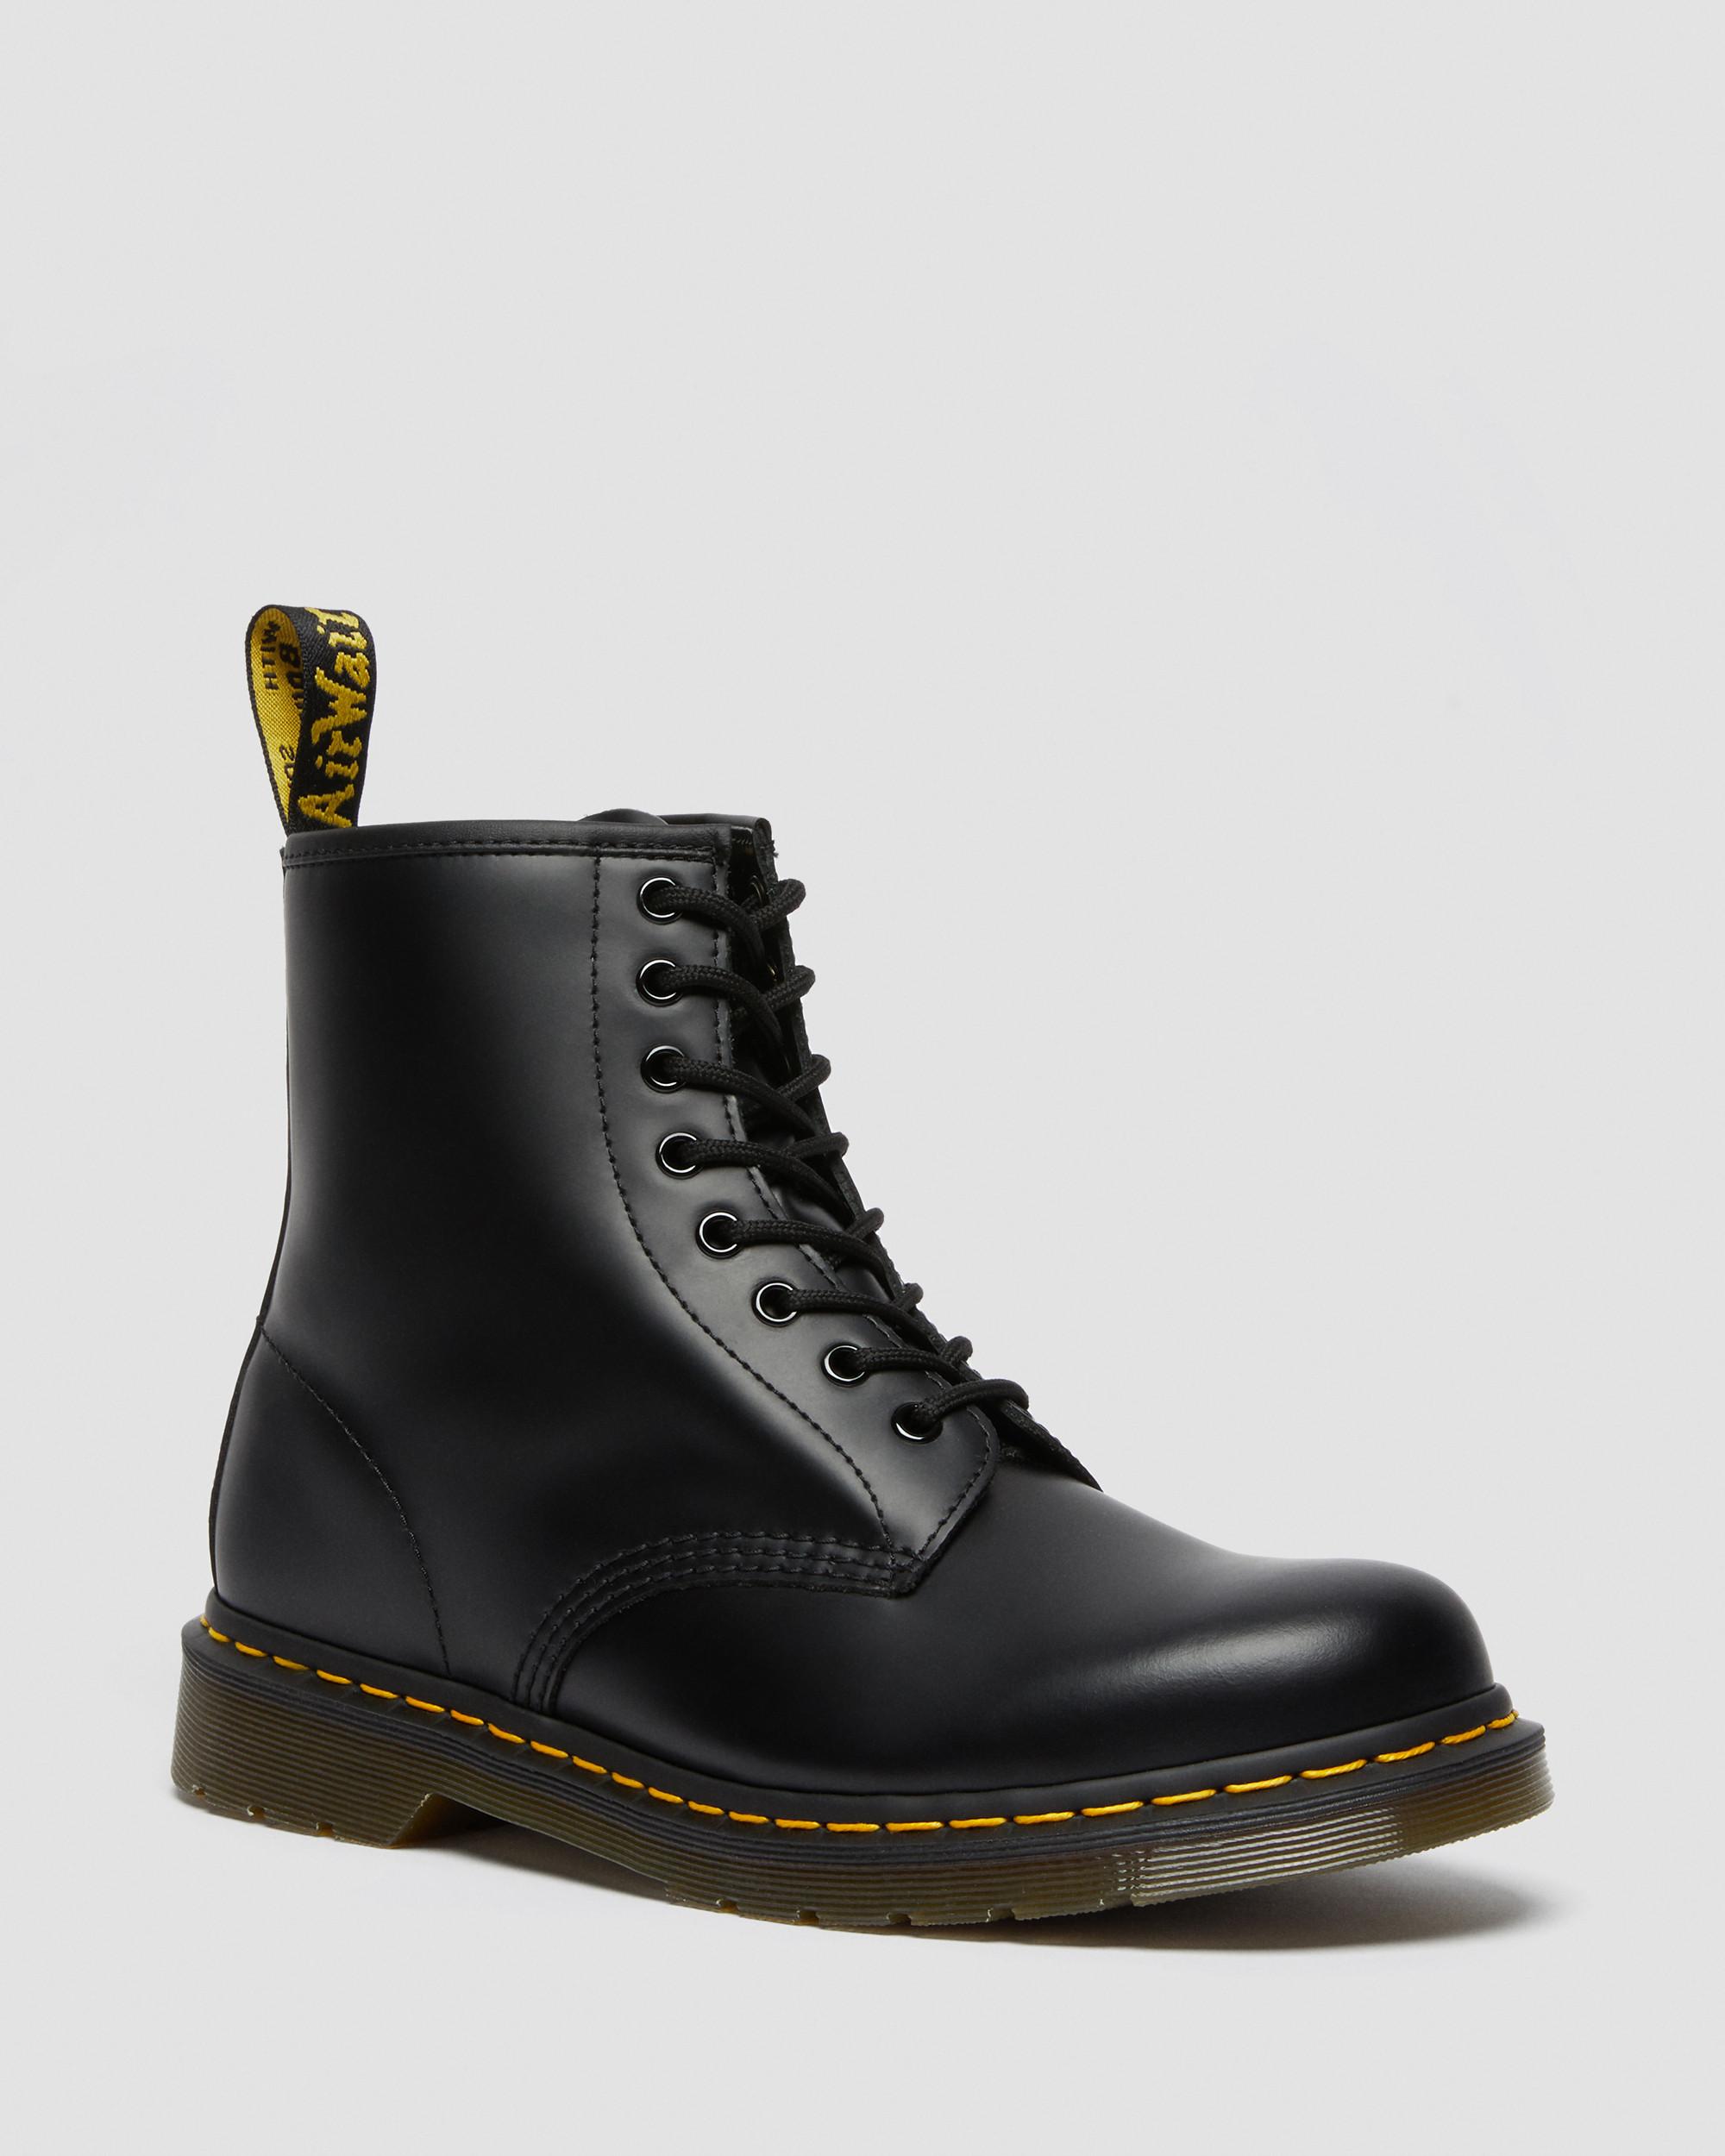 Respect Druppelen Uitbarsten 1460 Smooth Leather Lace Up Boots | Dr. Martens